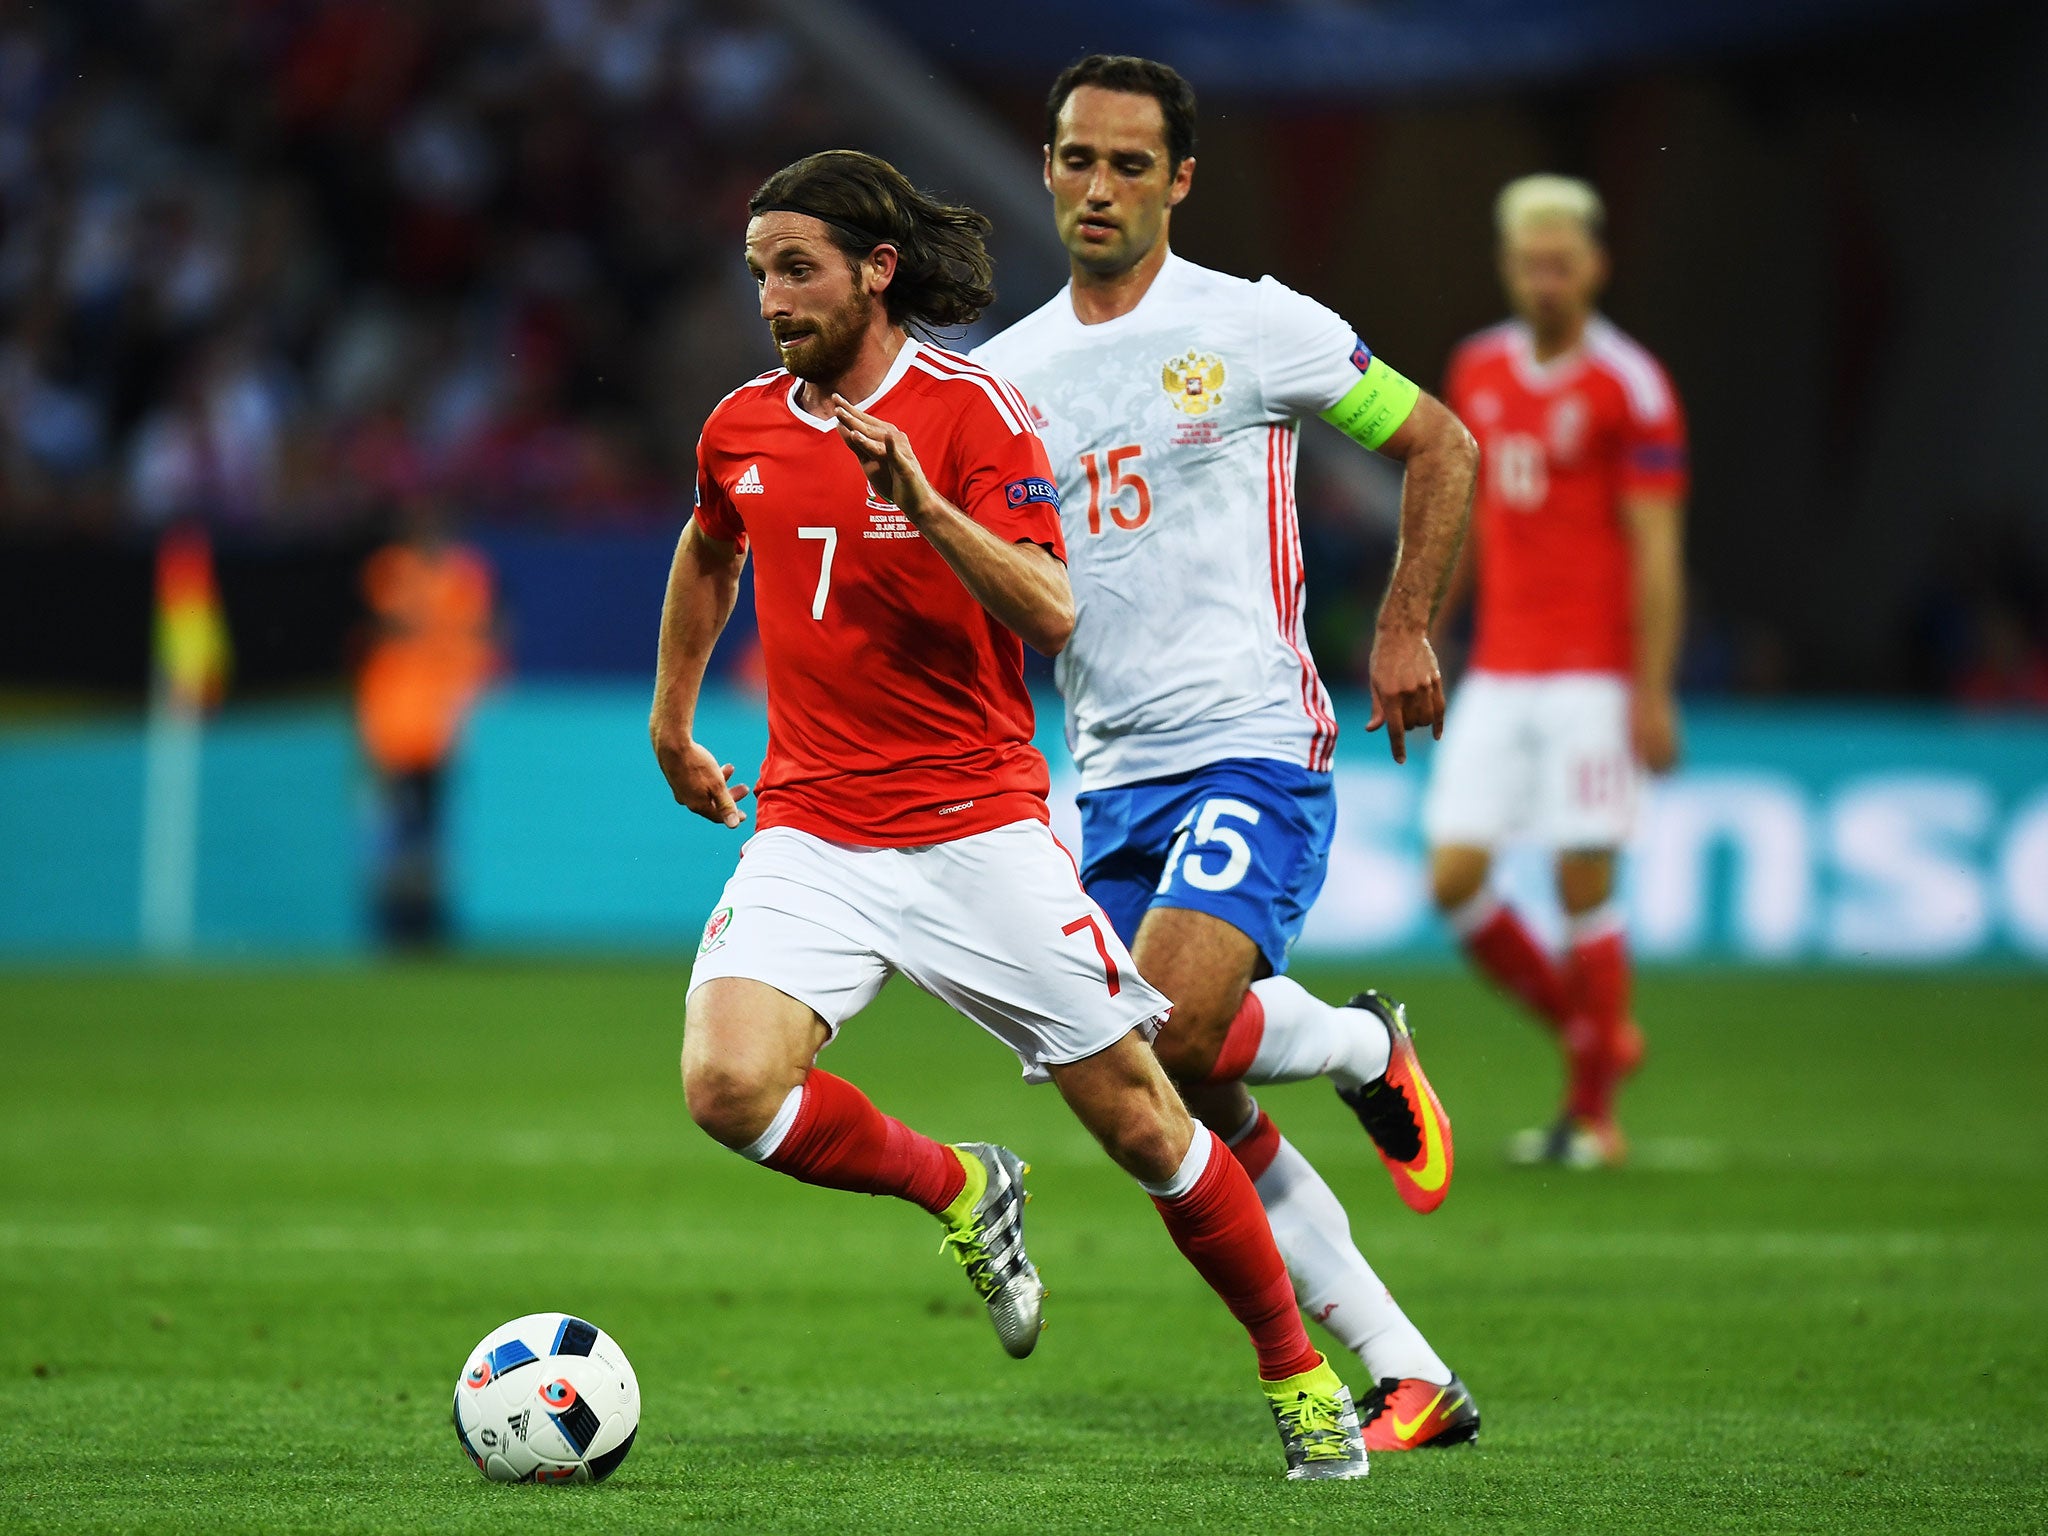 Joe Allen has so far impressed for Wales at Euro 2016